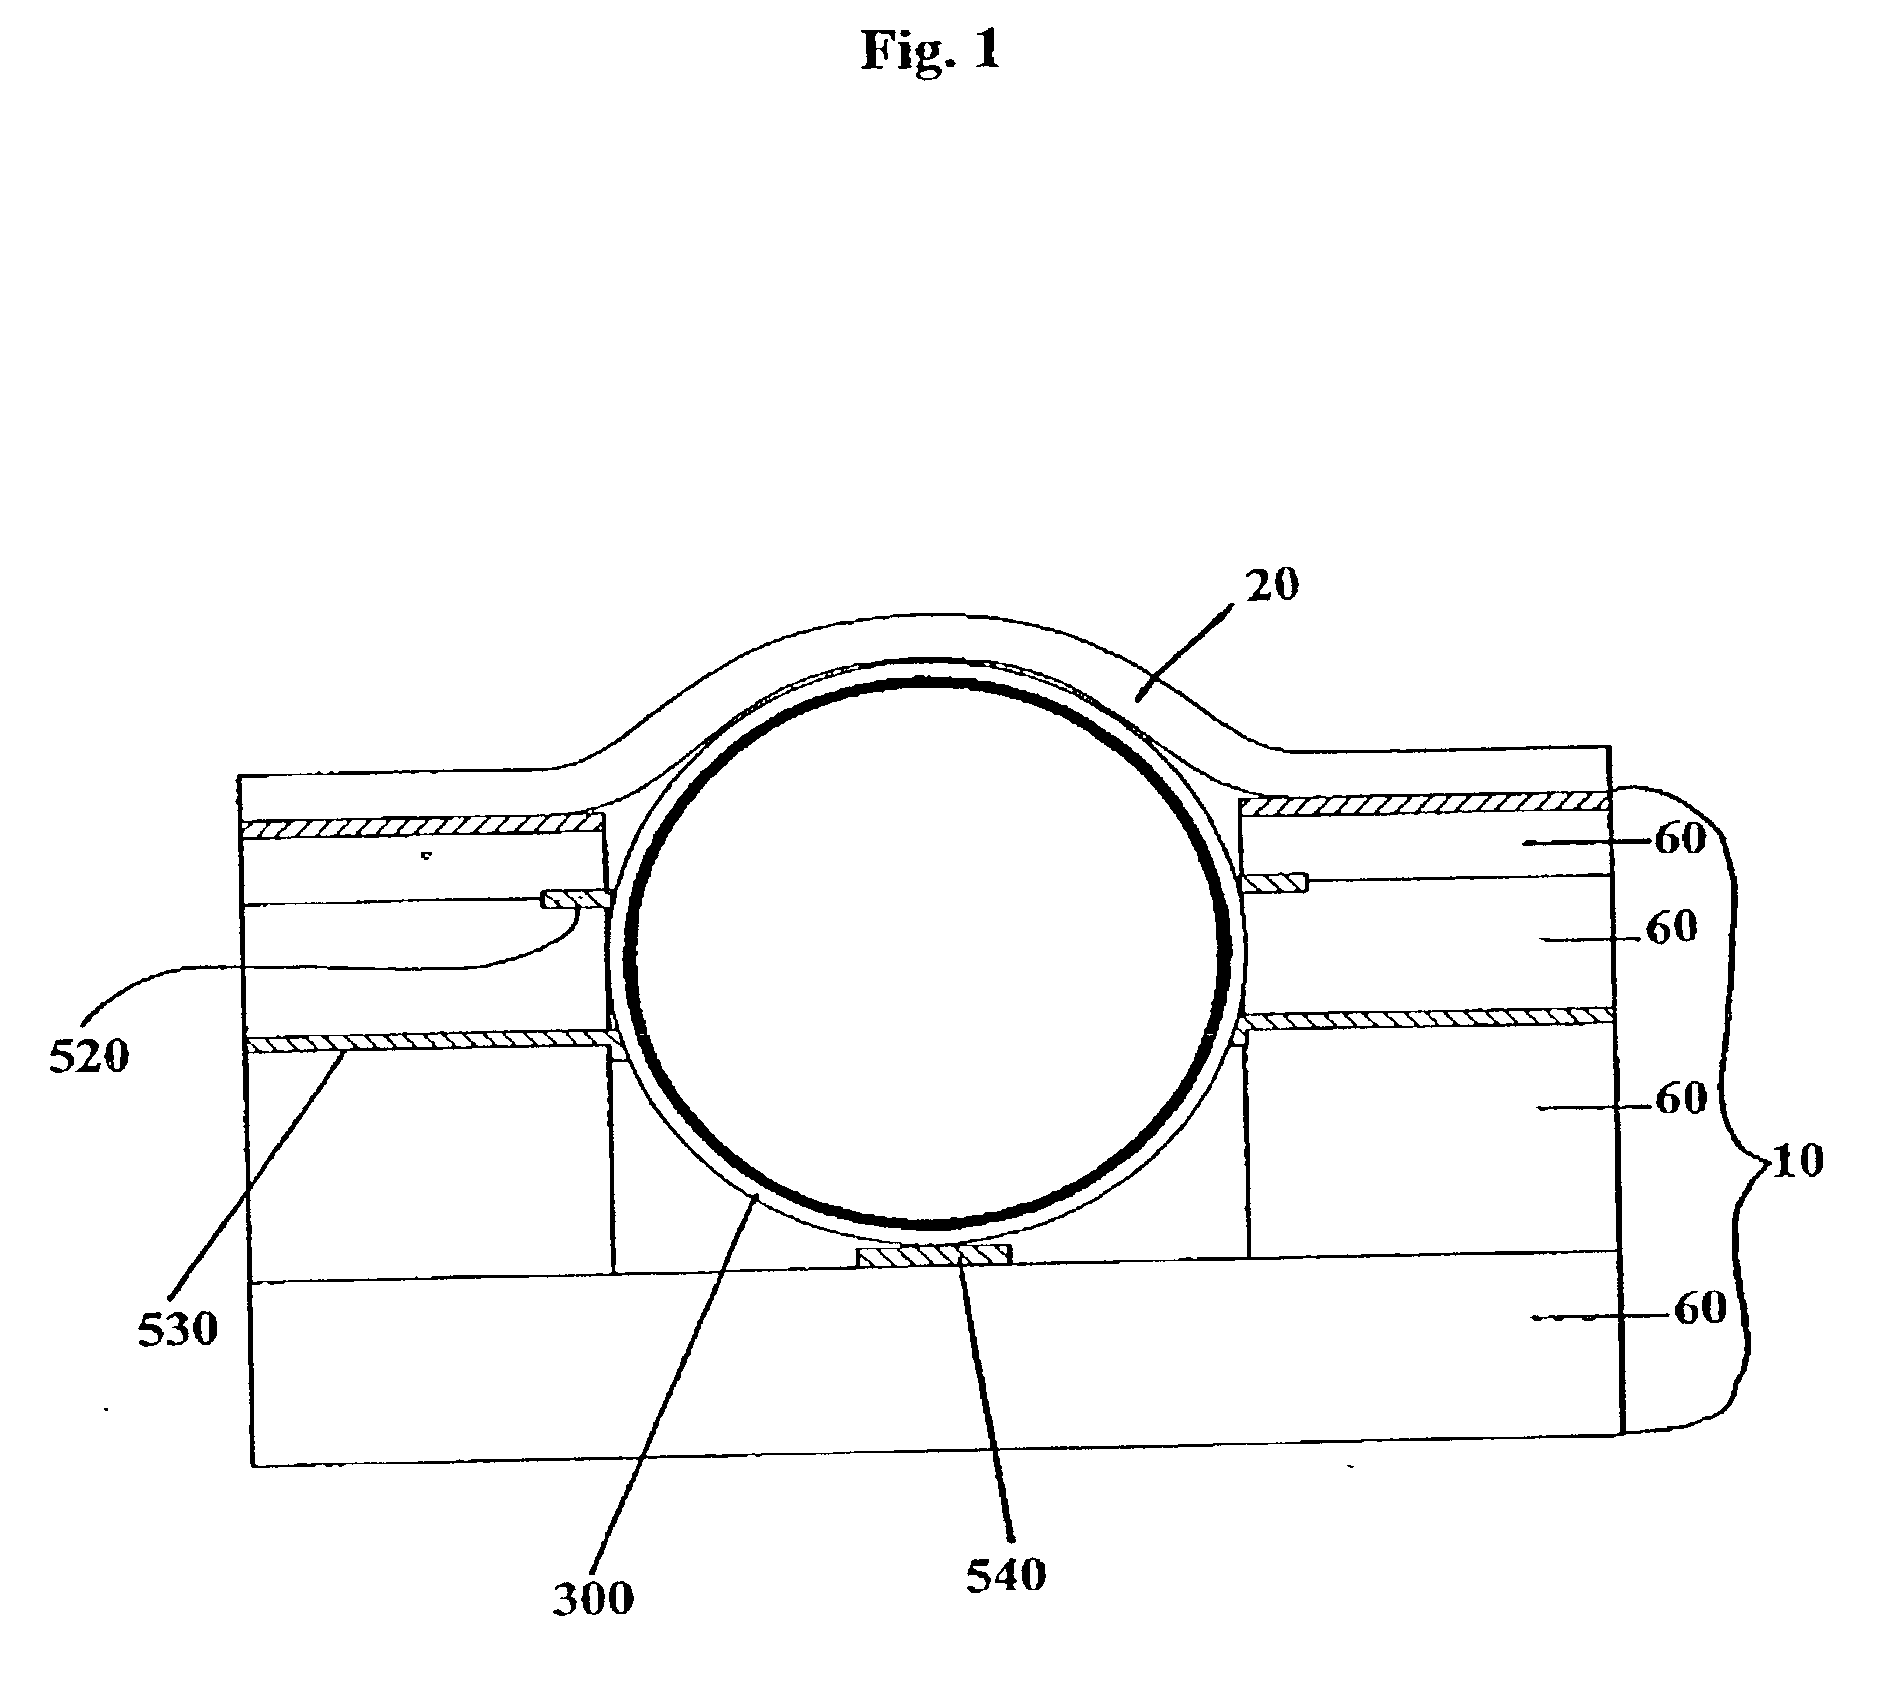 Design, fabrication, testing, and conditioning of micro-components for use in a light-emitting panel